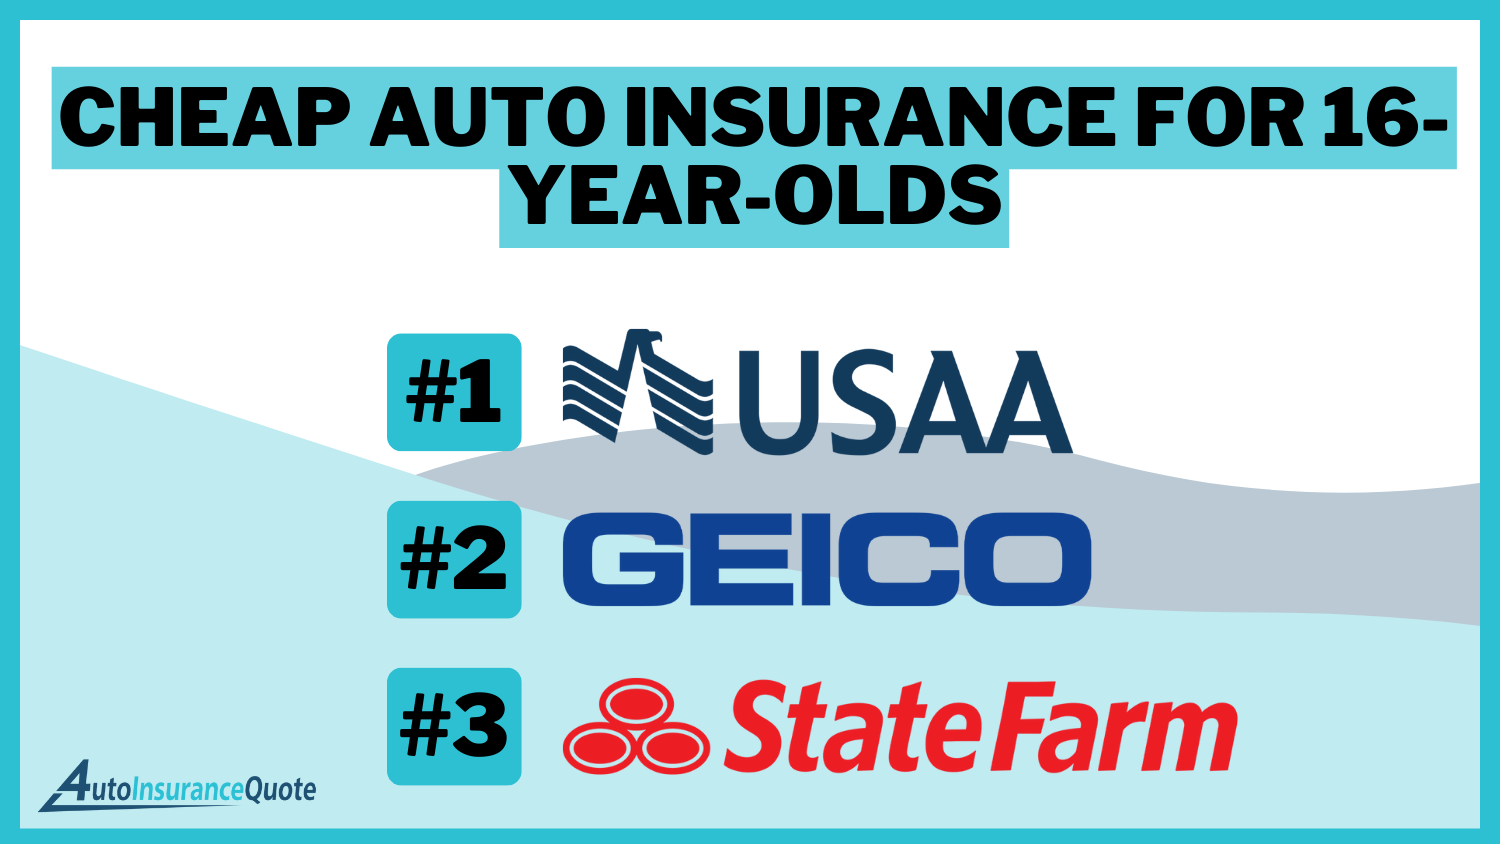 USAA, Geico, State Farm: Cheap Auto Insurance for 16-Year-Olds